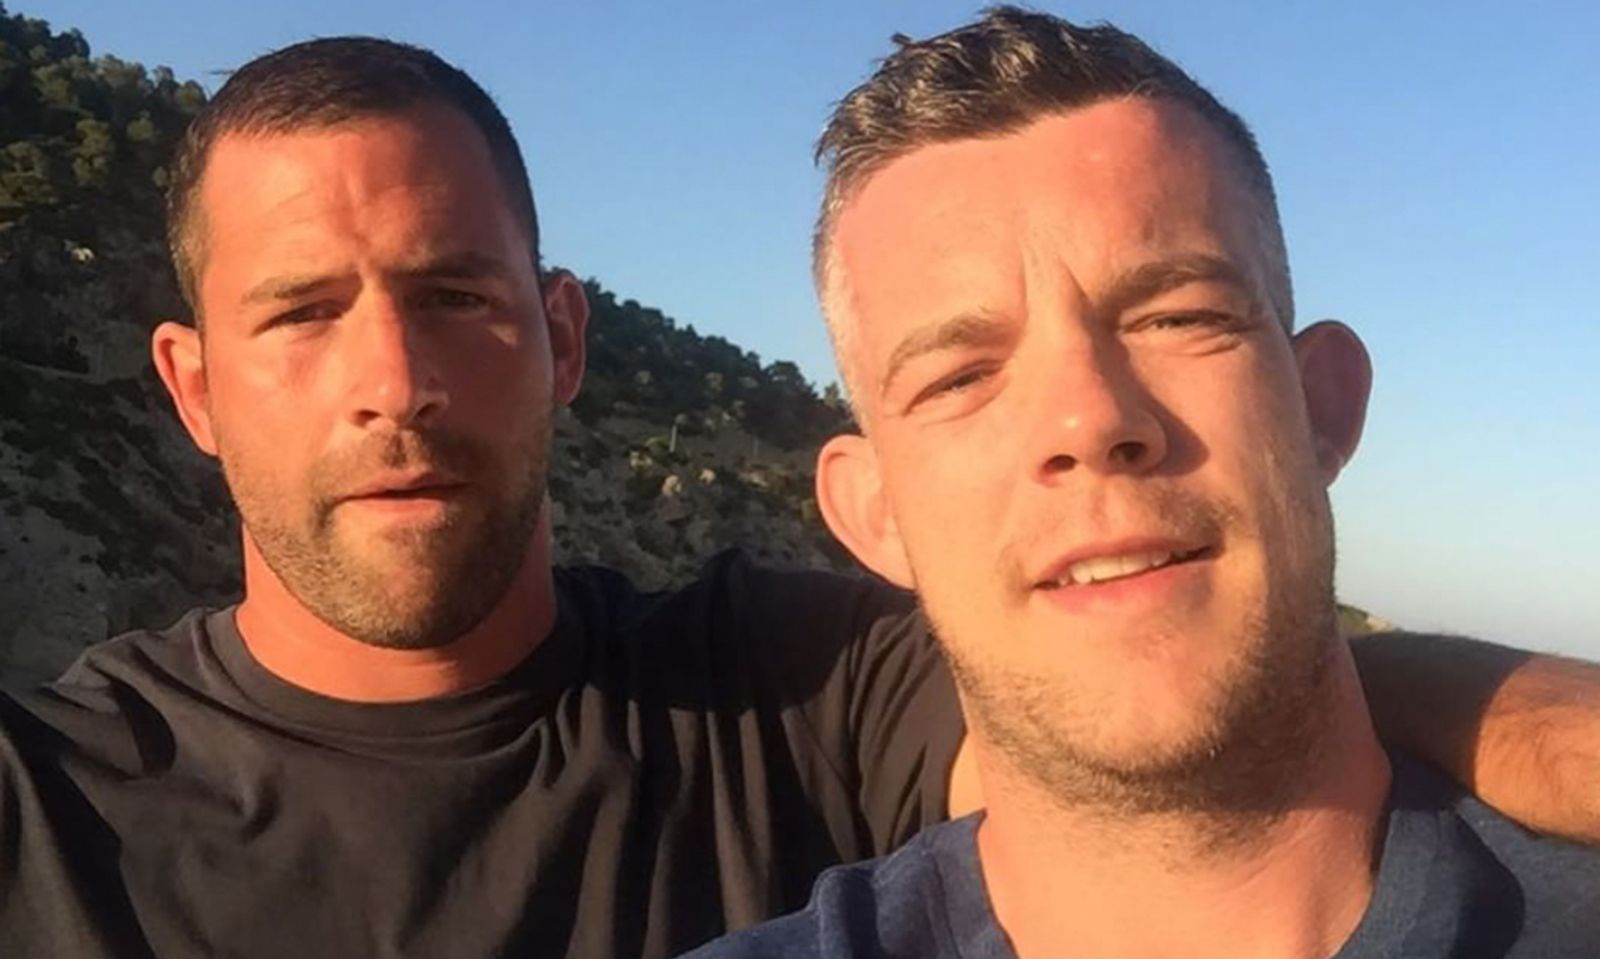 Randy Blue Gay Porn Star - Quantico' Star Russell Tovey Engaged to Former Randy Blue Model | AVN